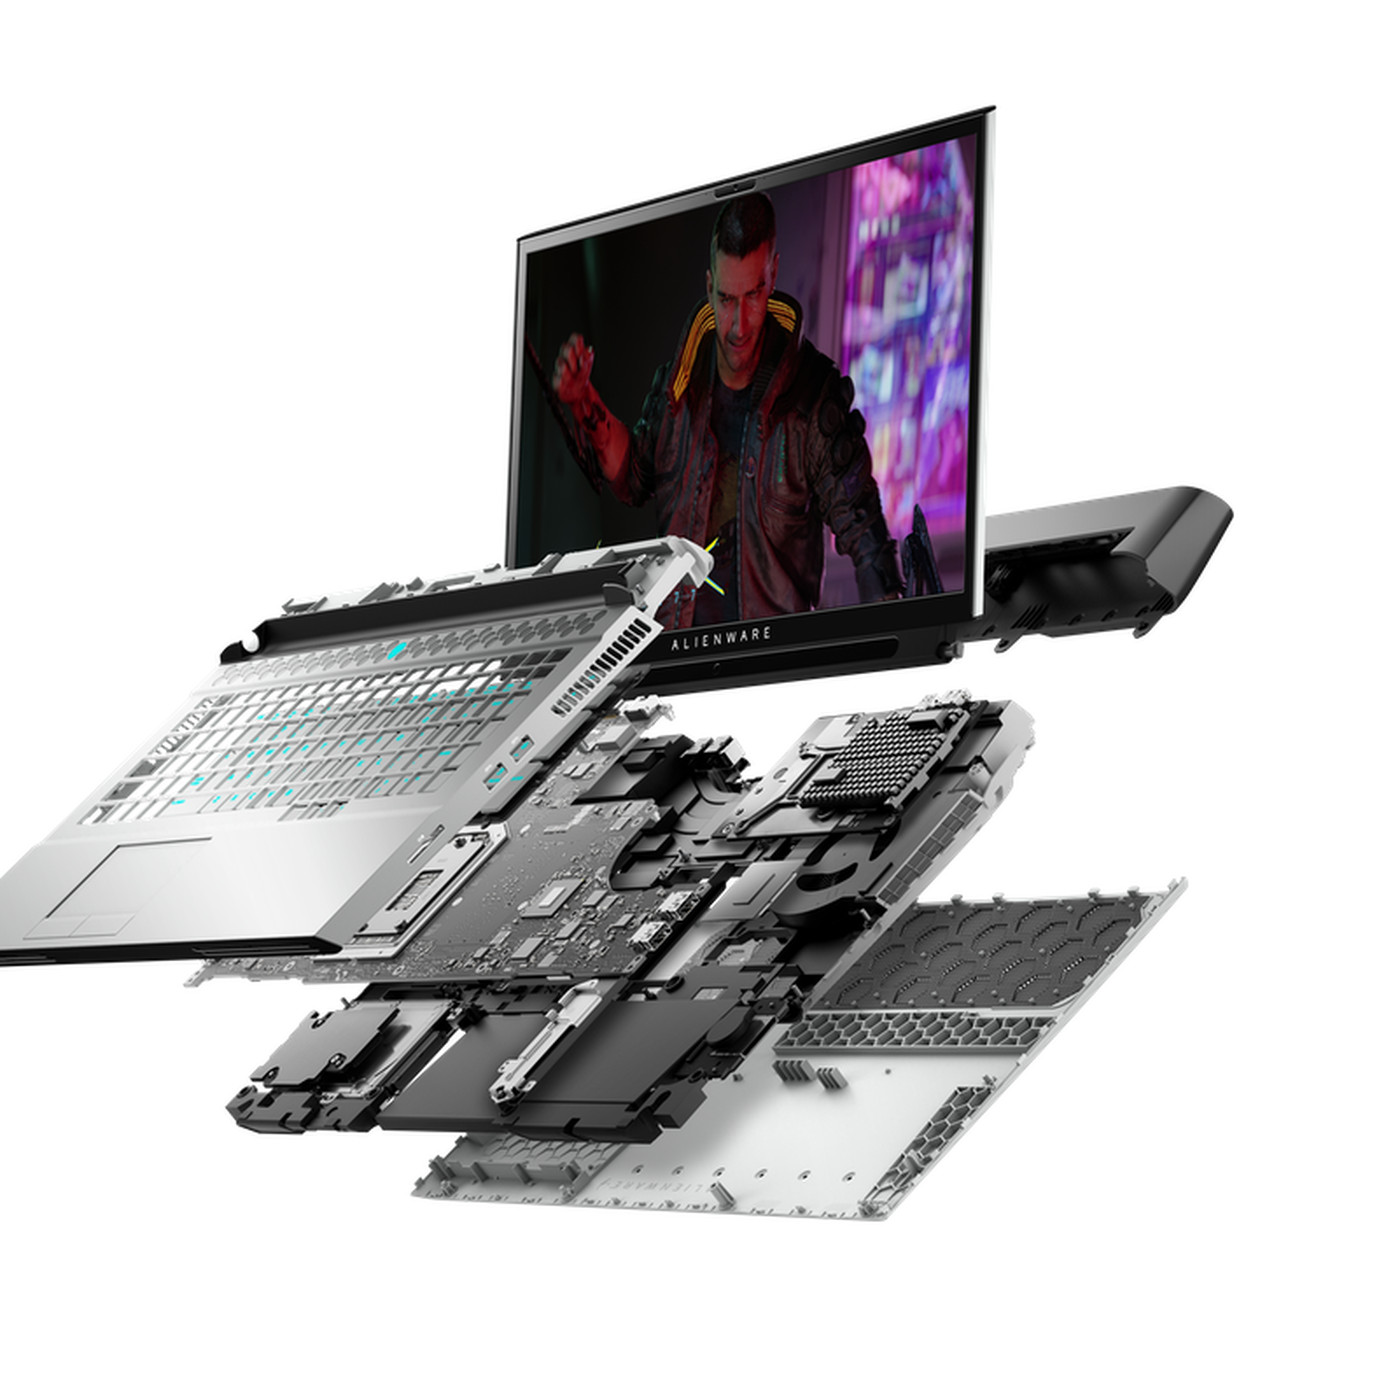 Alienware S Area 51m M15 And M17 Laptops Are Getting New 10th